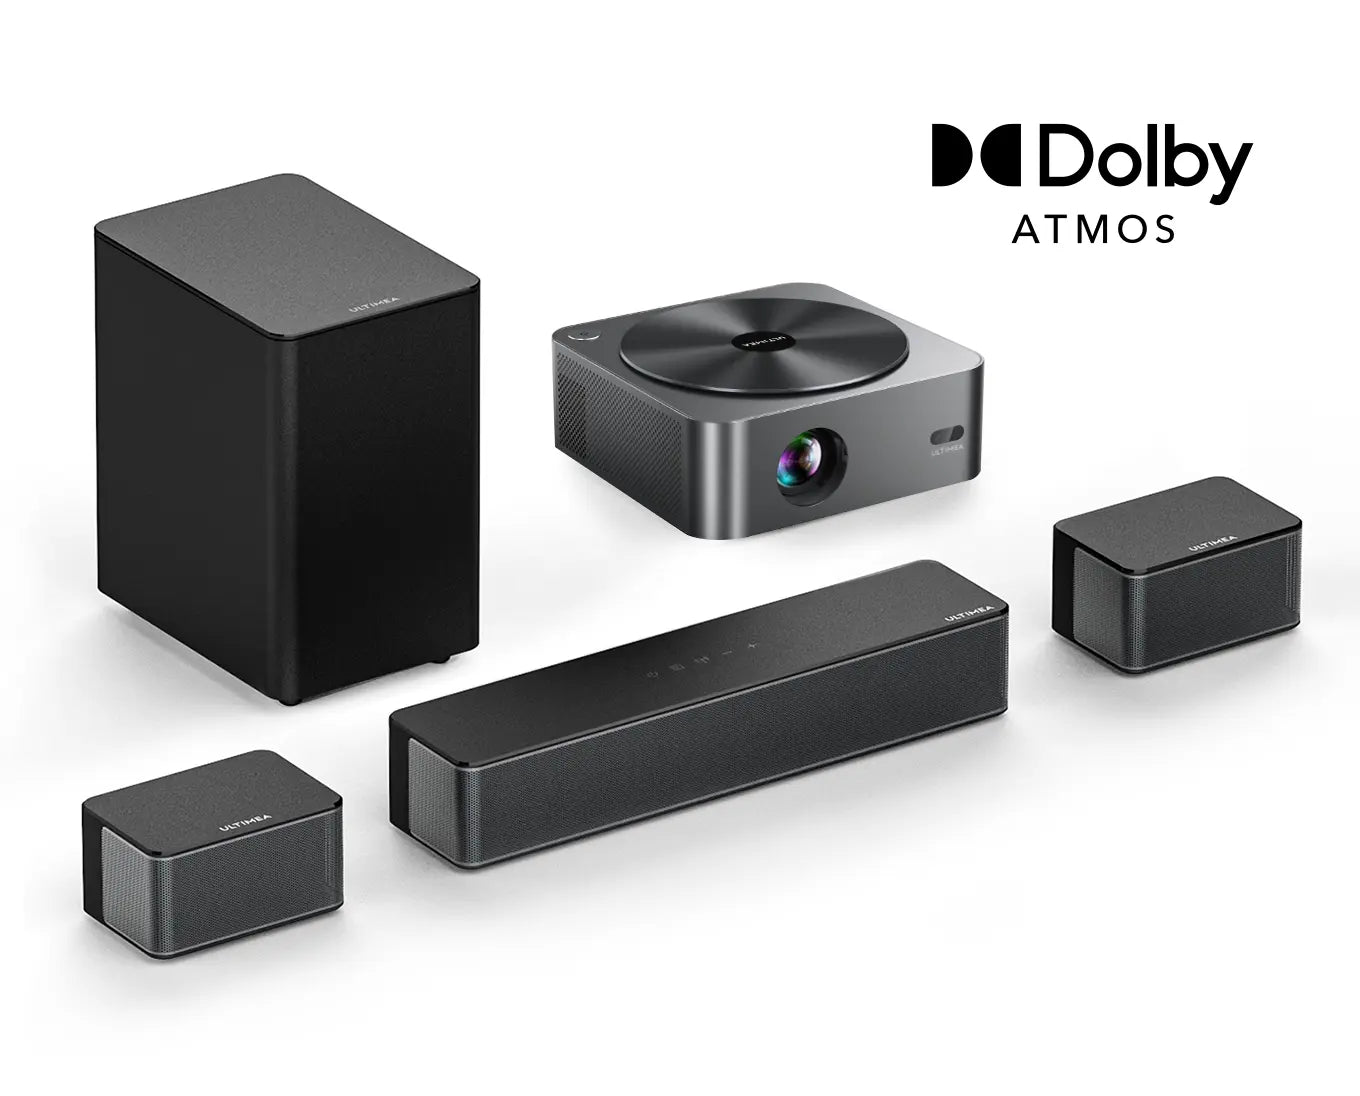 ULTIMEA Dolby Atmos Home Theater System | 5.1 Surround Sound